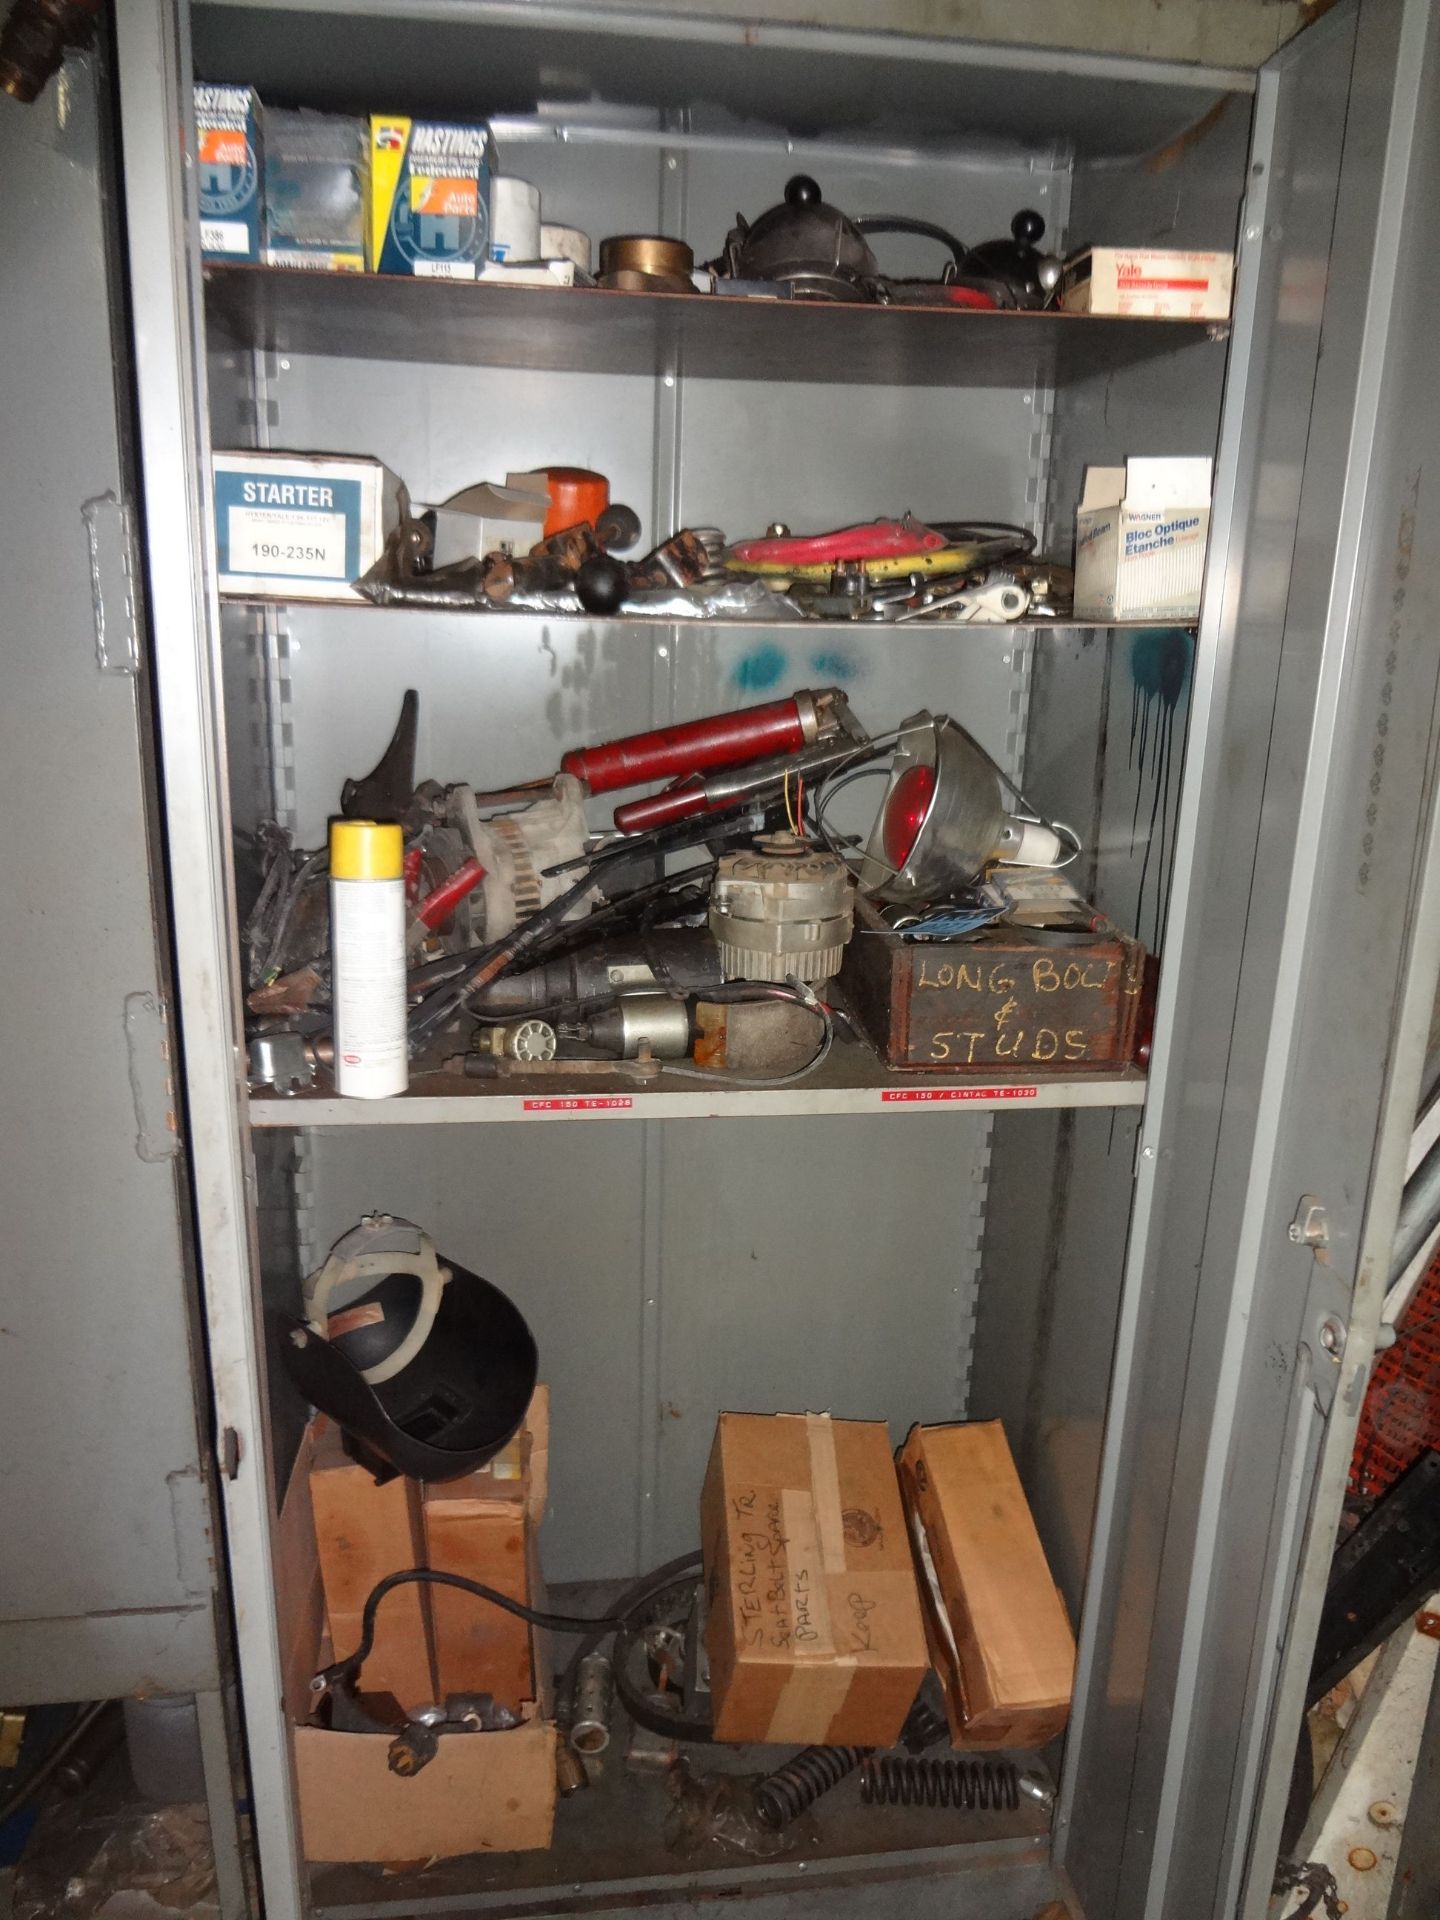 2-DOOR STEEL CABINET WITH CONTETNS INCLUDING LIFT TRUCK PARTS, MACHINE PARTS, FUSES, ELECTRICAL, - Image 2 of 8